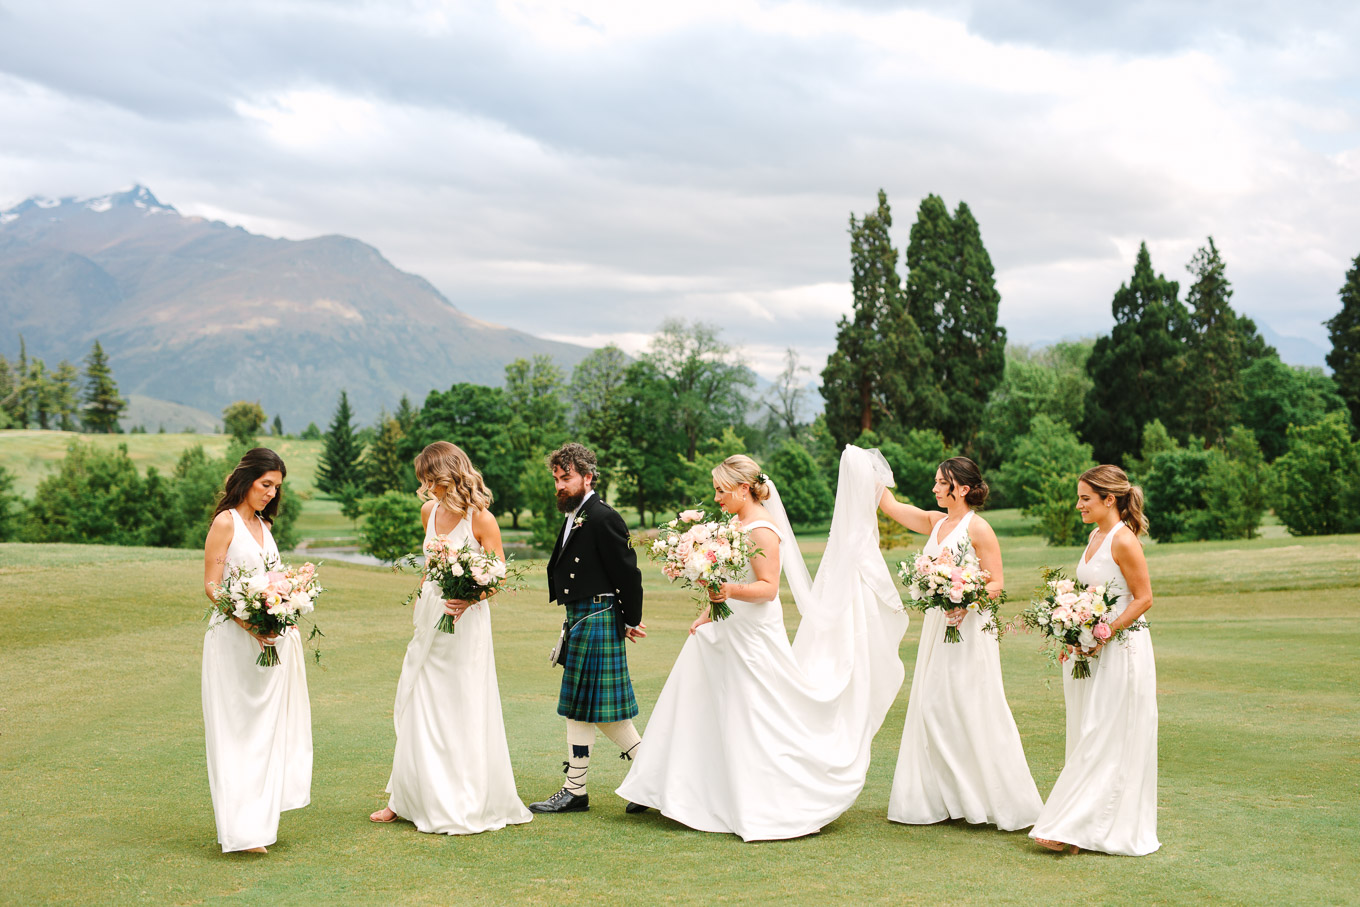 Bridal party walking among the mountains. Millbrook Resort Queenstown New Zealand wedding by Mary Costa Photography | www.marycostaweddings.com